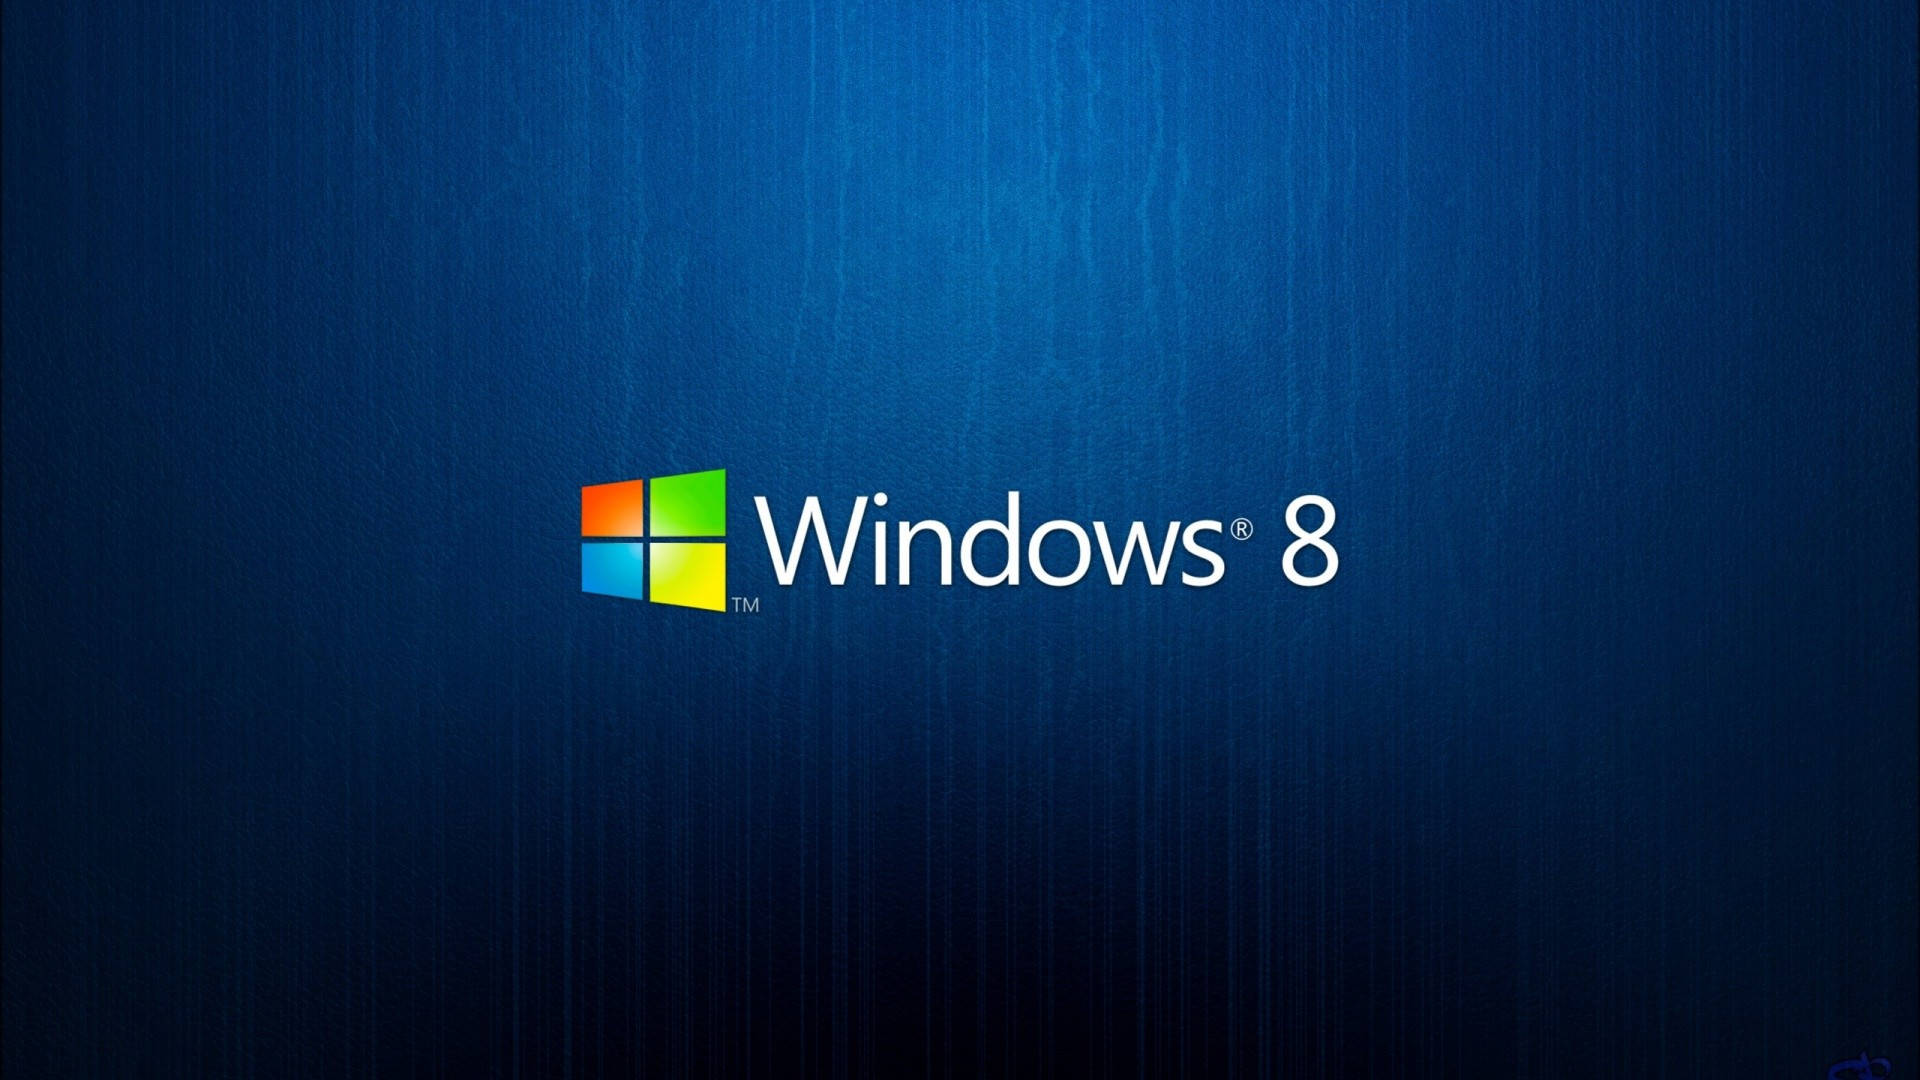 Blue Abstract Windows 8 Background Wallpaper